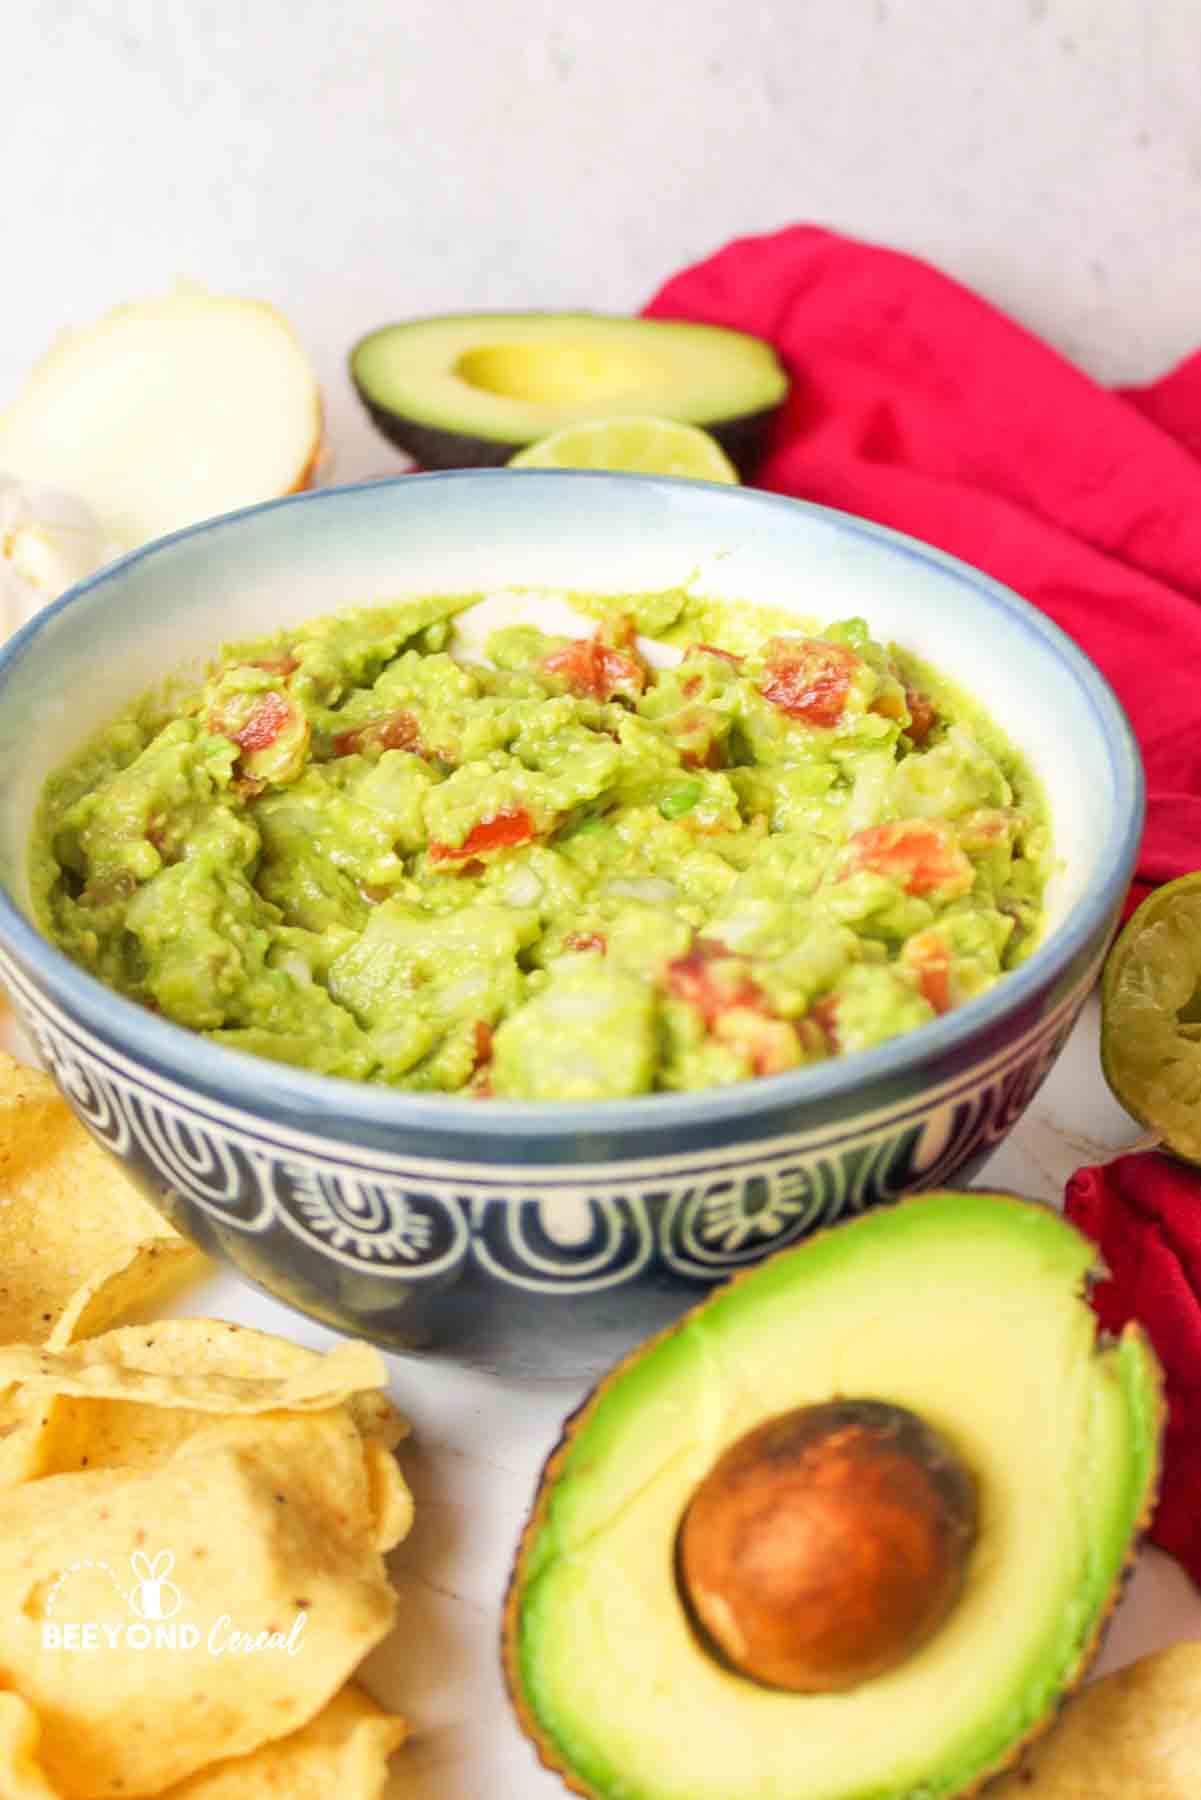 an upclose view of guacamole in a blue bowl next to tortilla chips and half an avocado